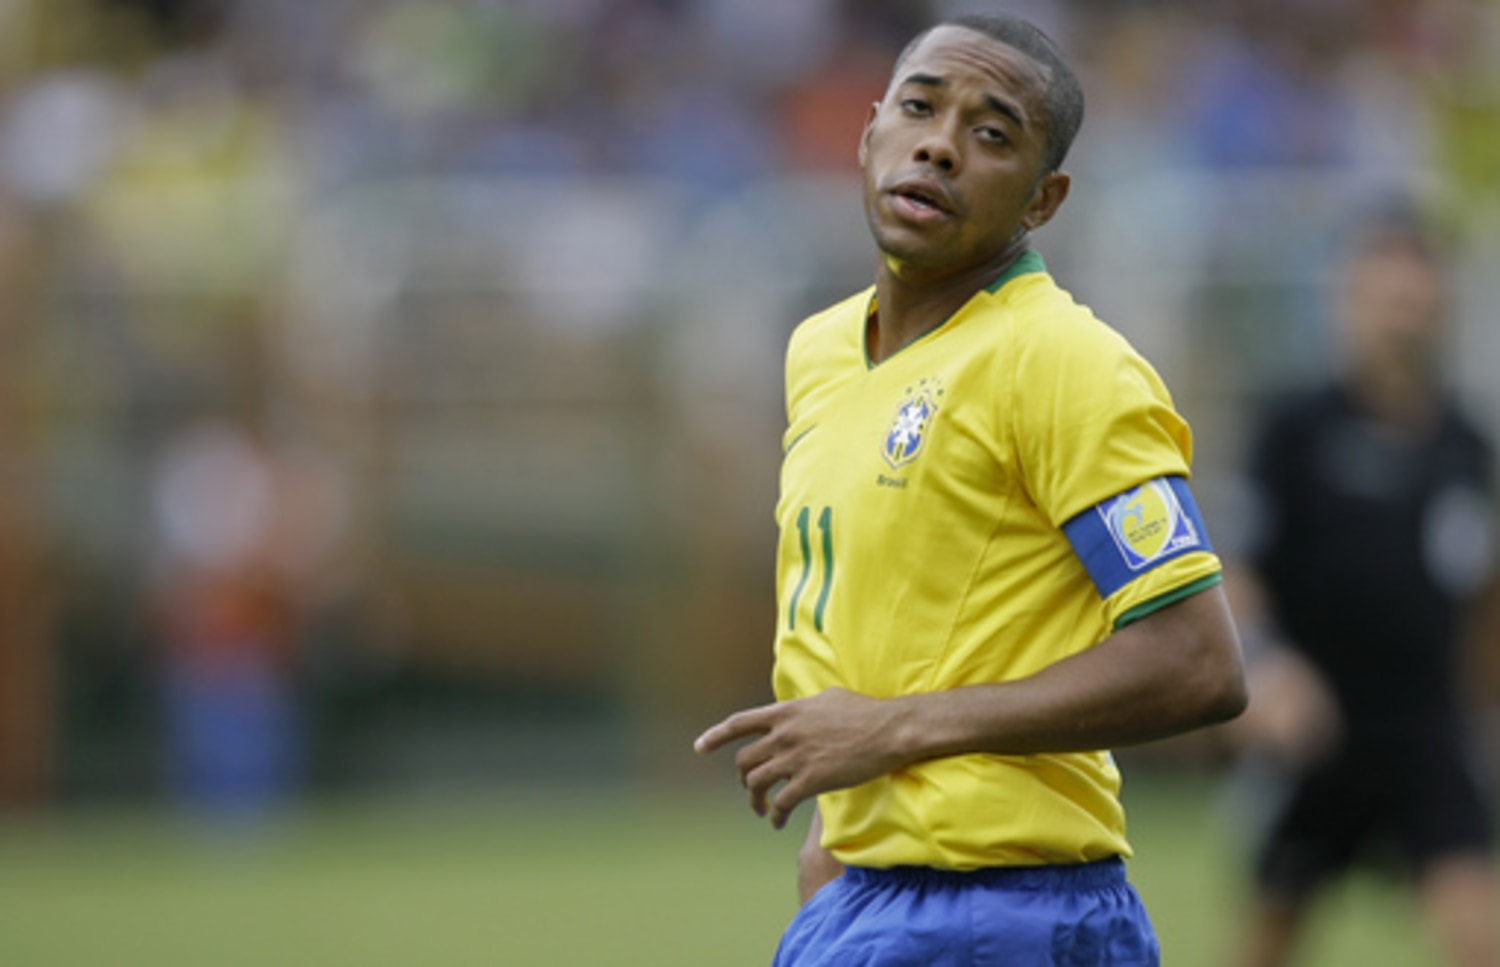 EXCLUSIVE: Former Real Madrid and Manchester City Forward, Robson de Souza AKA Robinho Has Been Sentenced to 9 Years In Prison After He Was Found Guilty For Raping A Young Girl